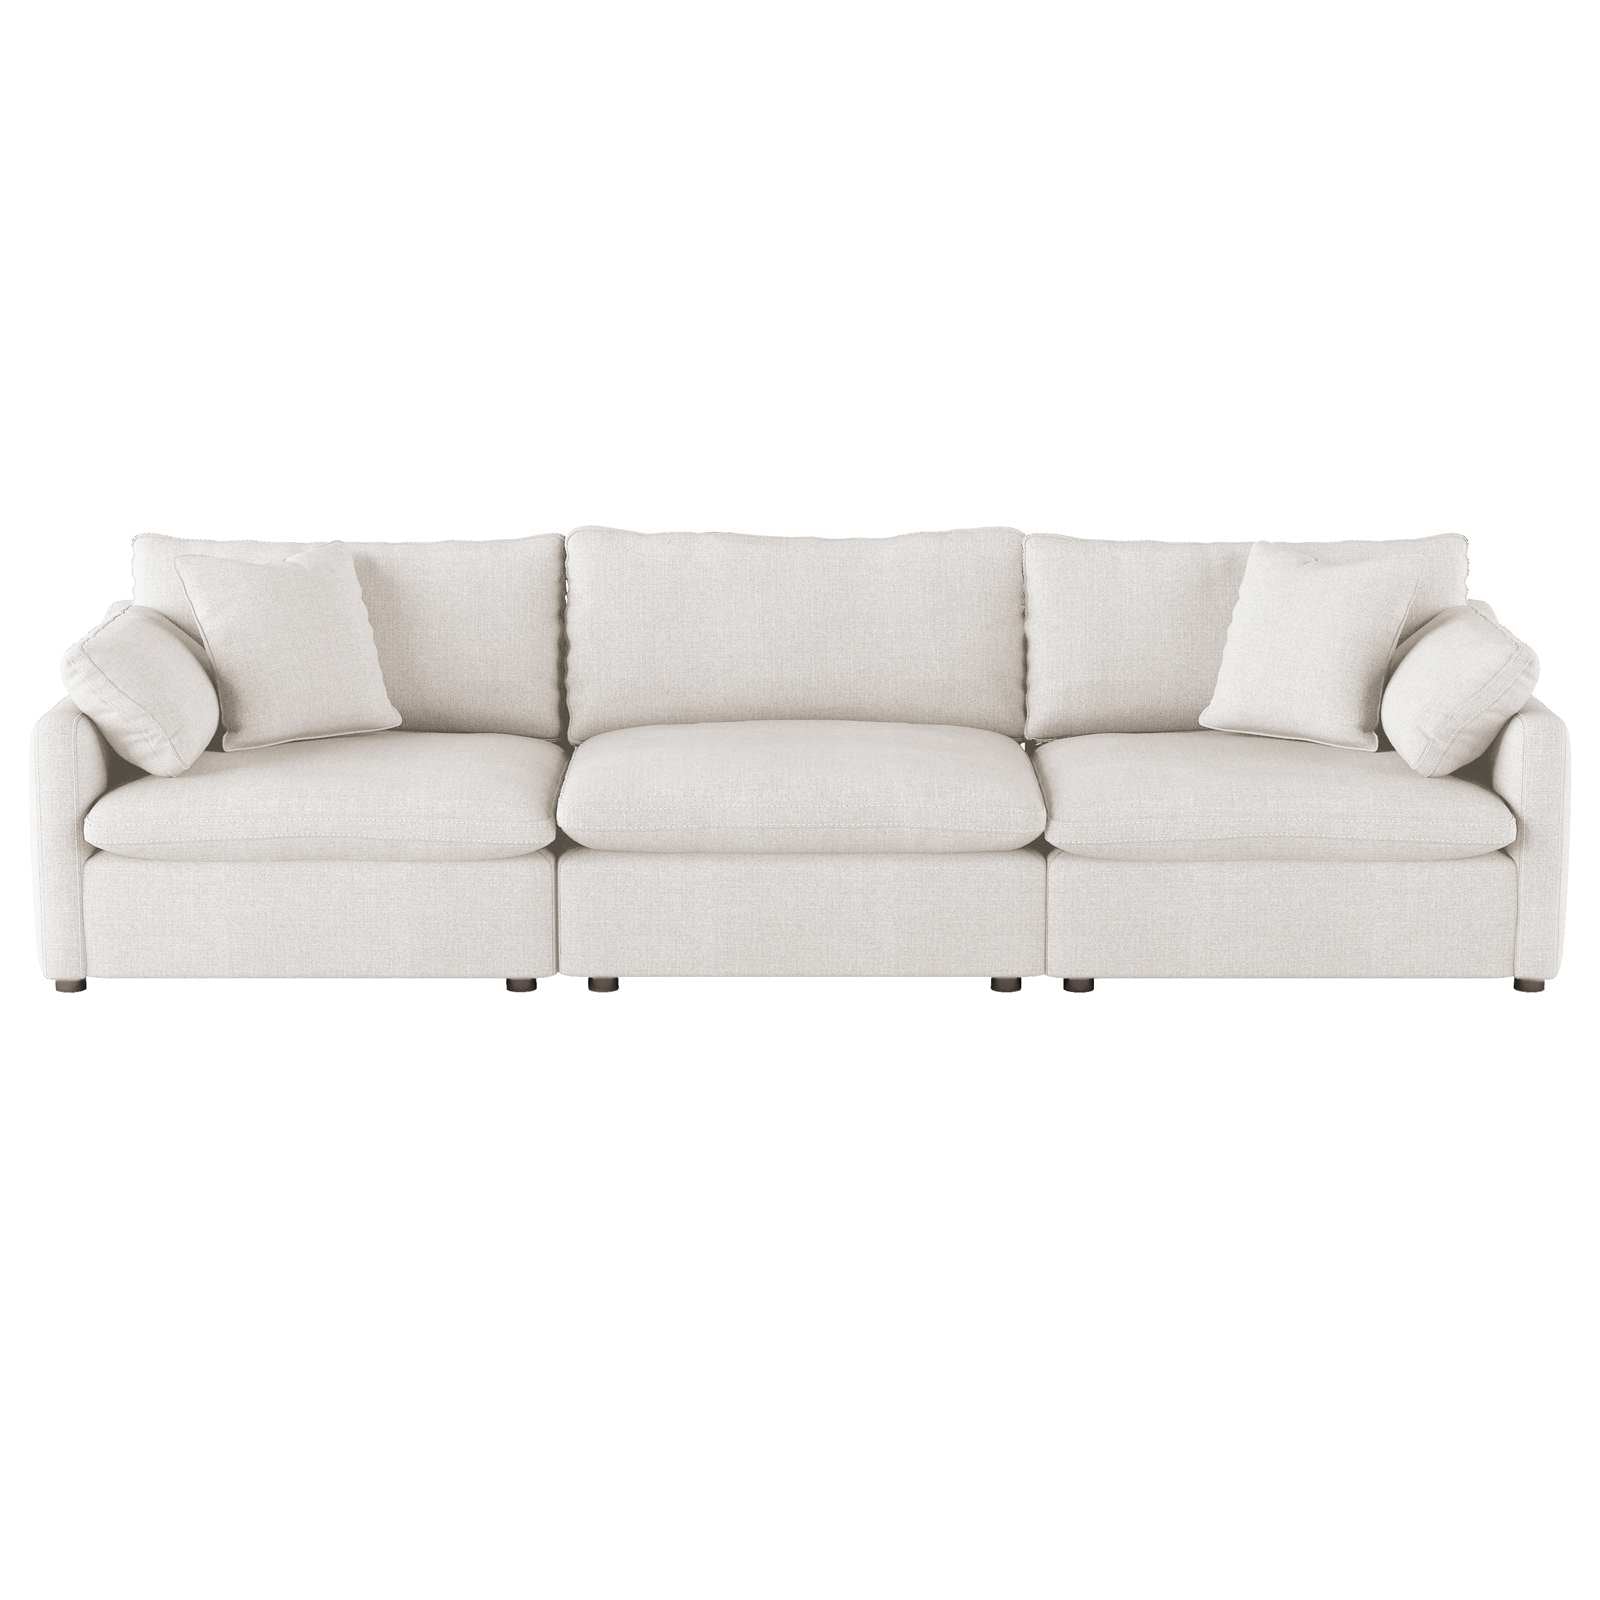 Howerton Sofa Collection Beige 9544be-4